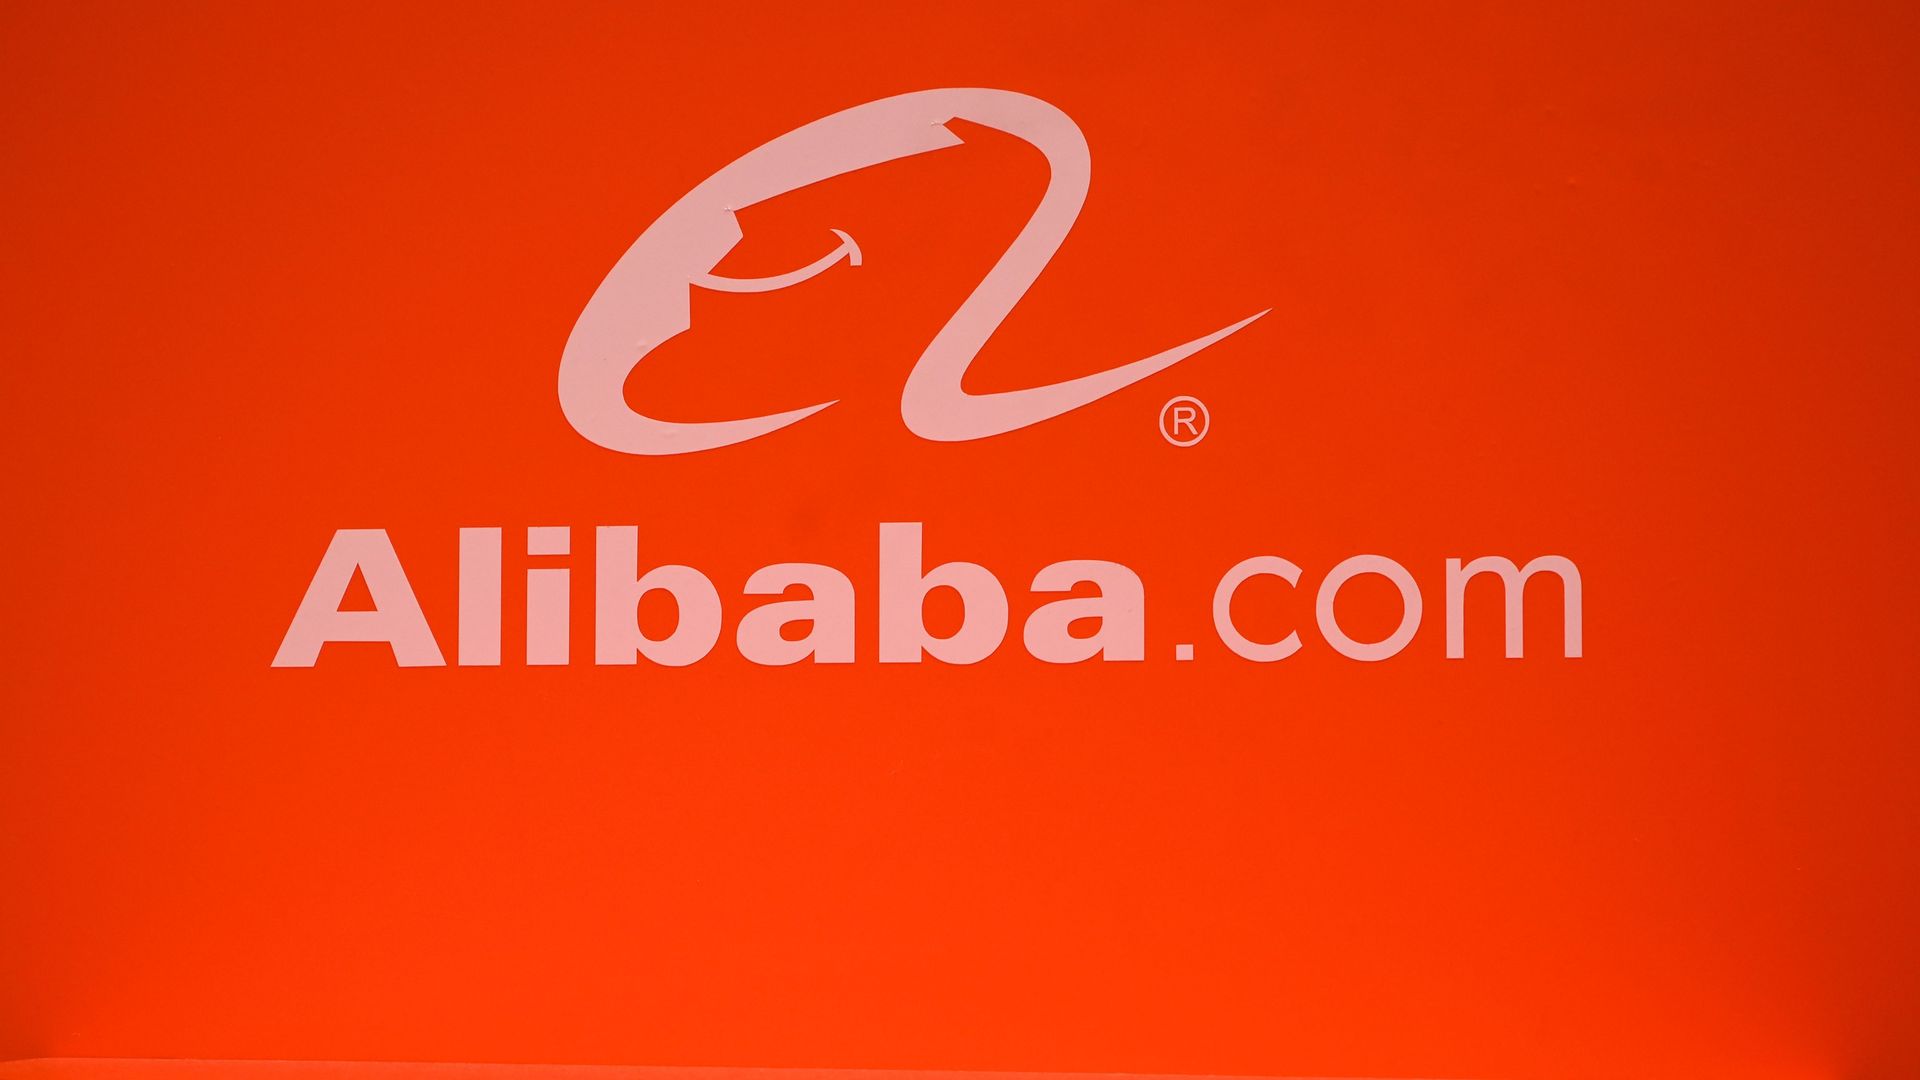 The Alibaba logo at a consumer electronics show in Las Vegas in 2019.